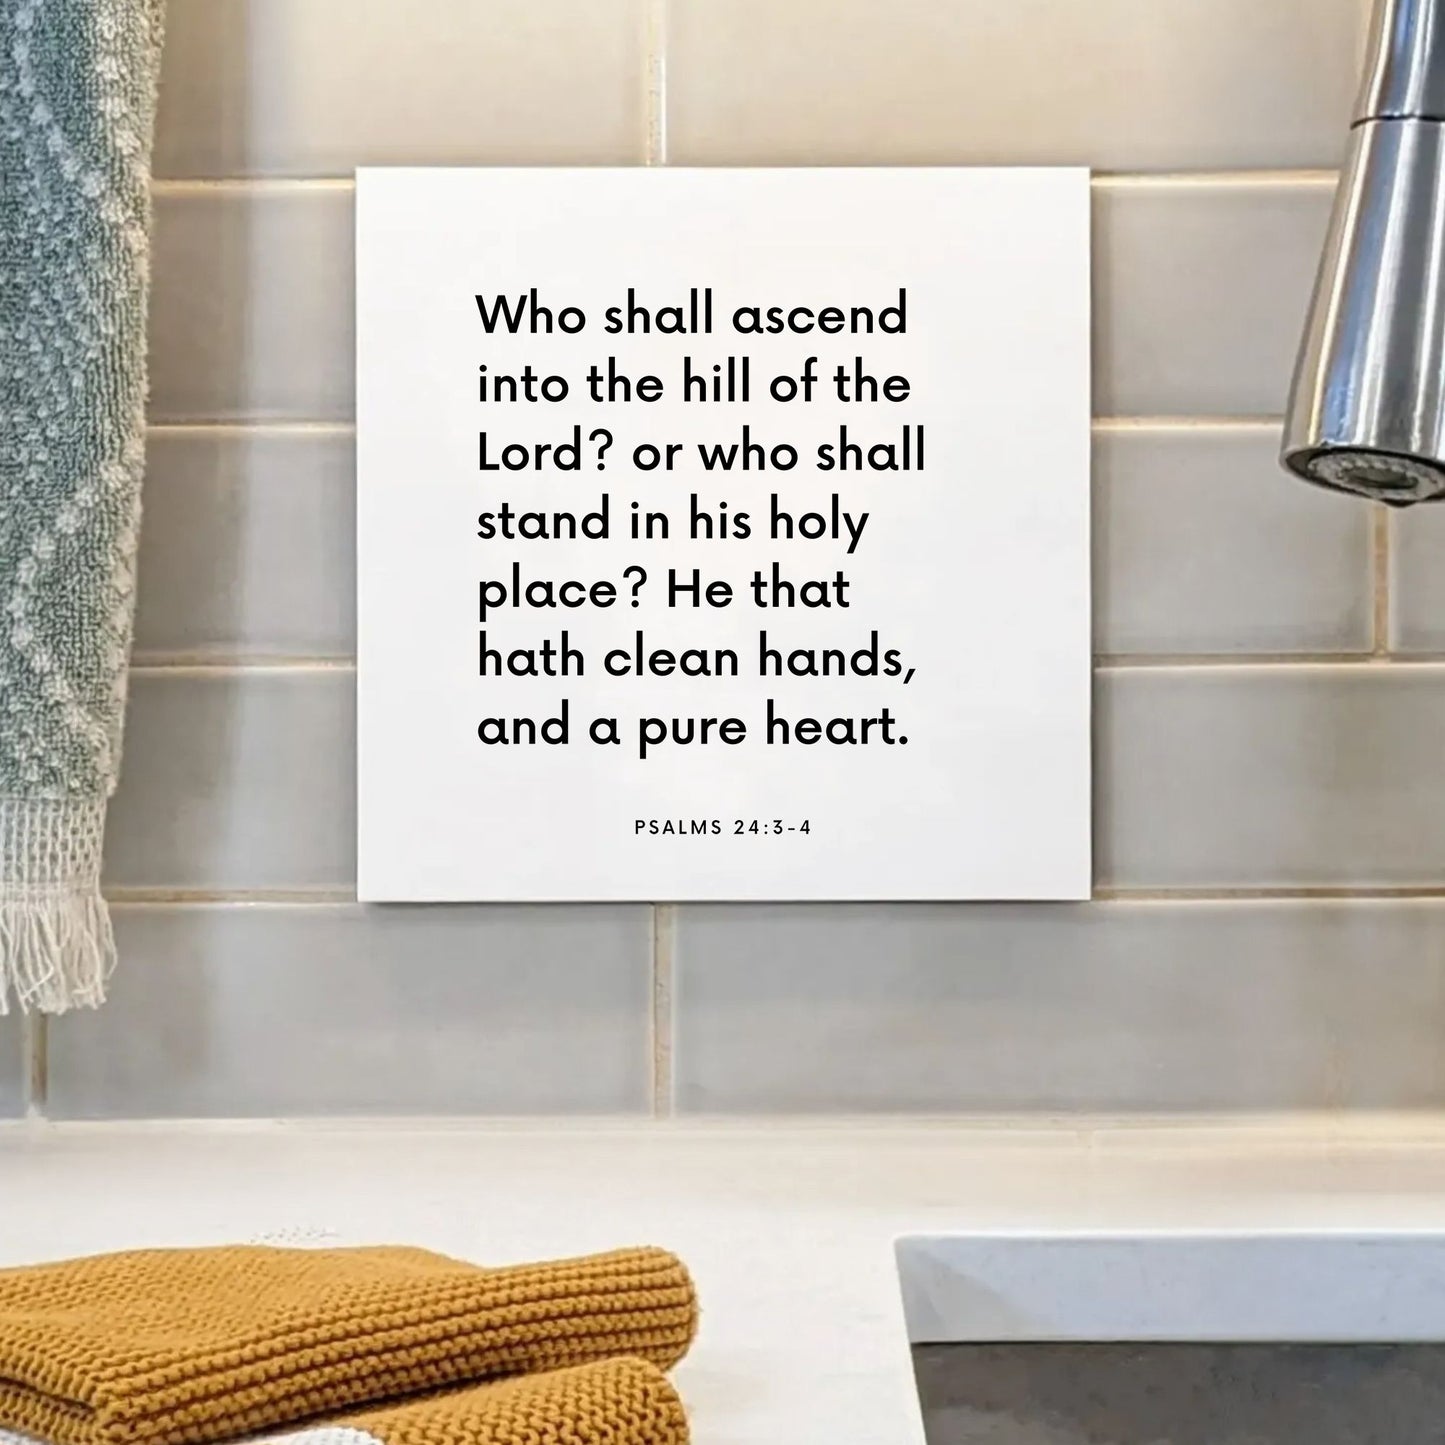 Sink mouting of the scripture tile for Psalms 24:3-4 - "Who shall ascend into the hill of the Lord?"